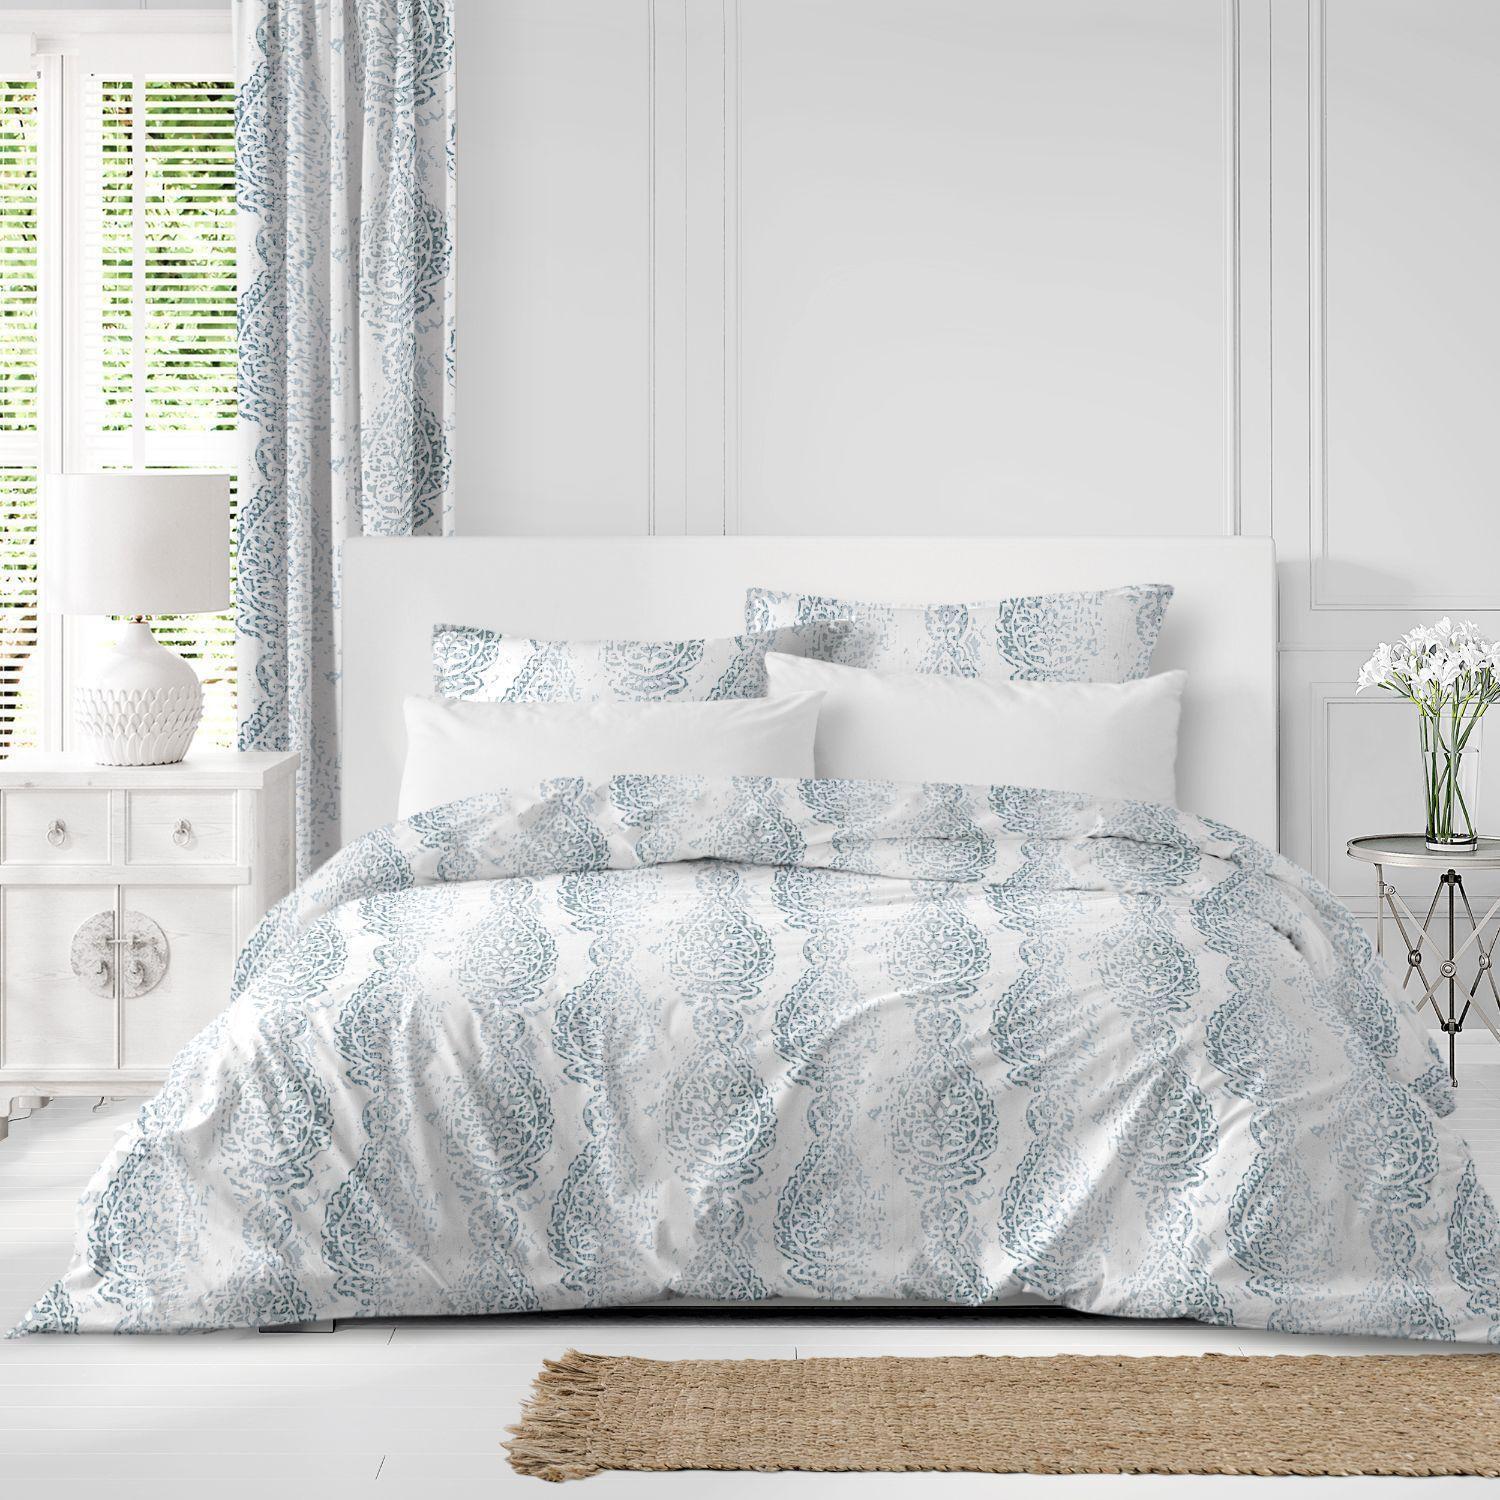 Set of 3 White and Blue Distressed Paisley Comforter with Pillow Shams - King alternate image